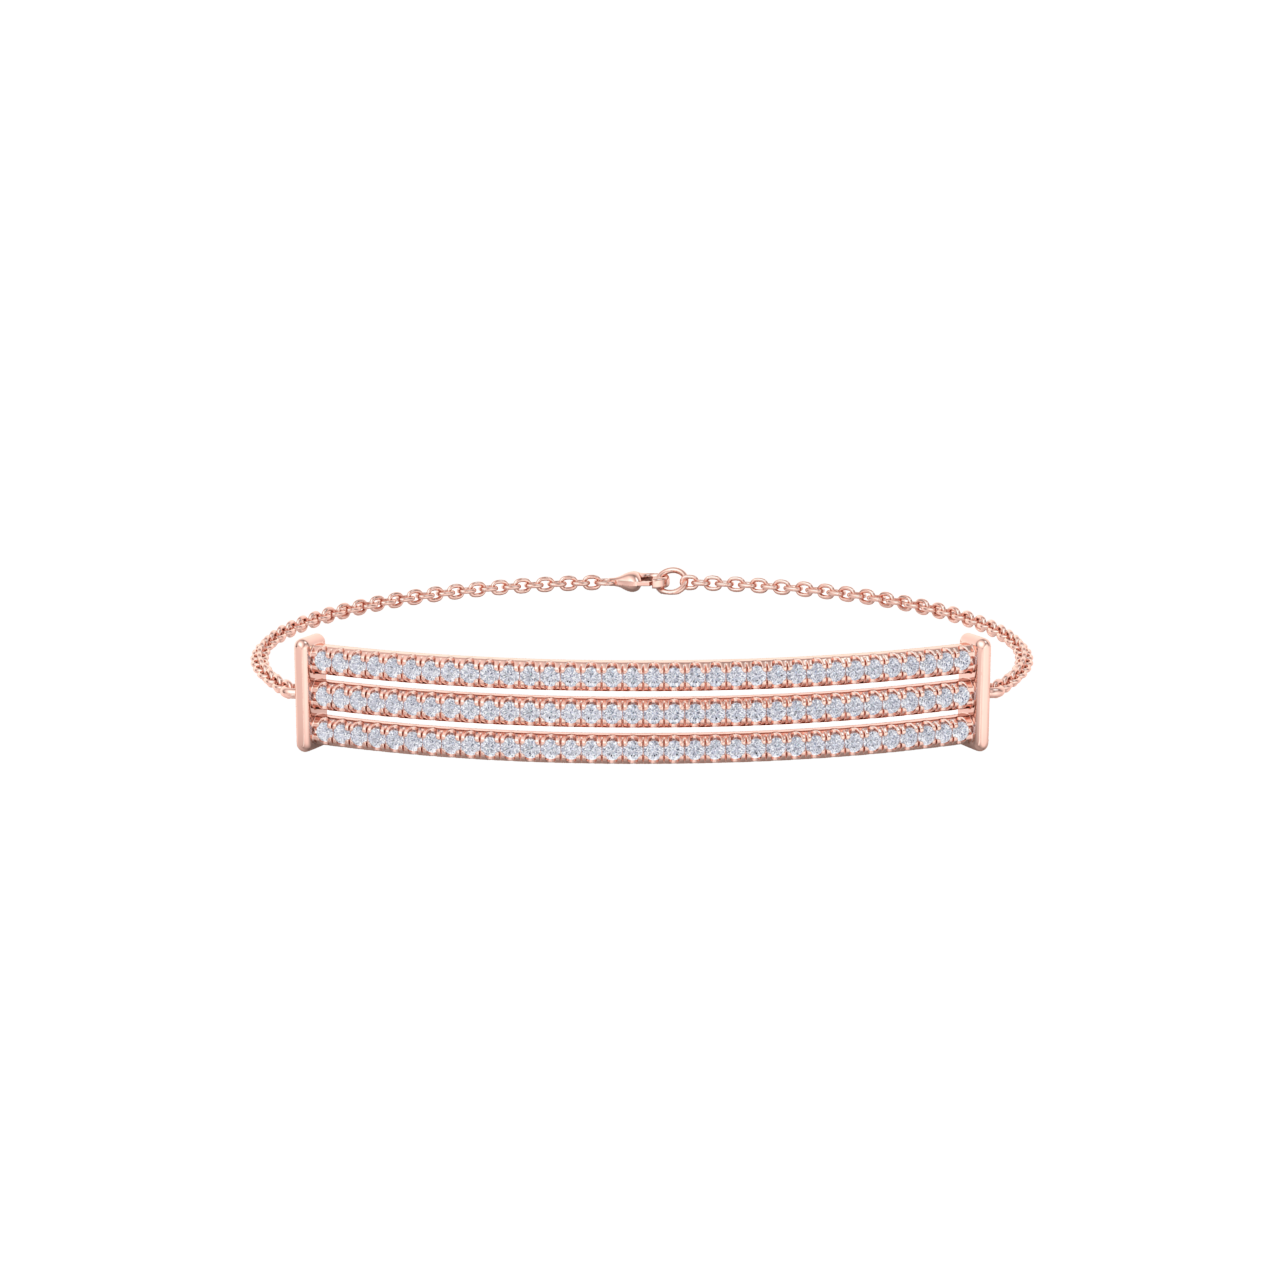 Bar diamond bracelet in rose gold with white diamonds of 0.93 ct in weight